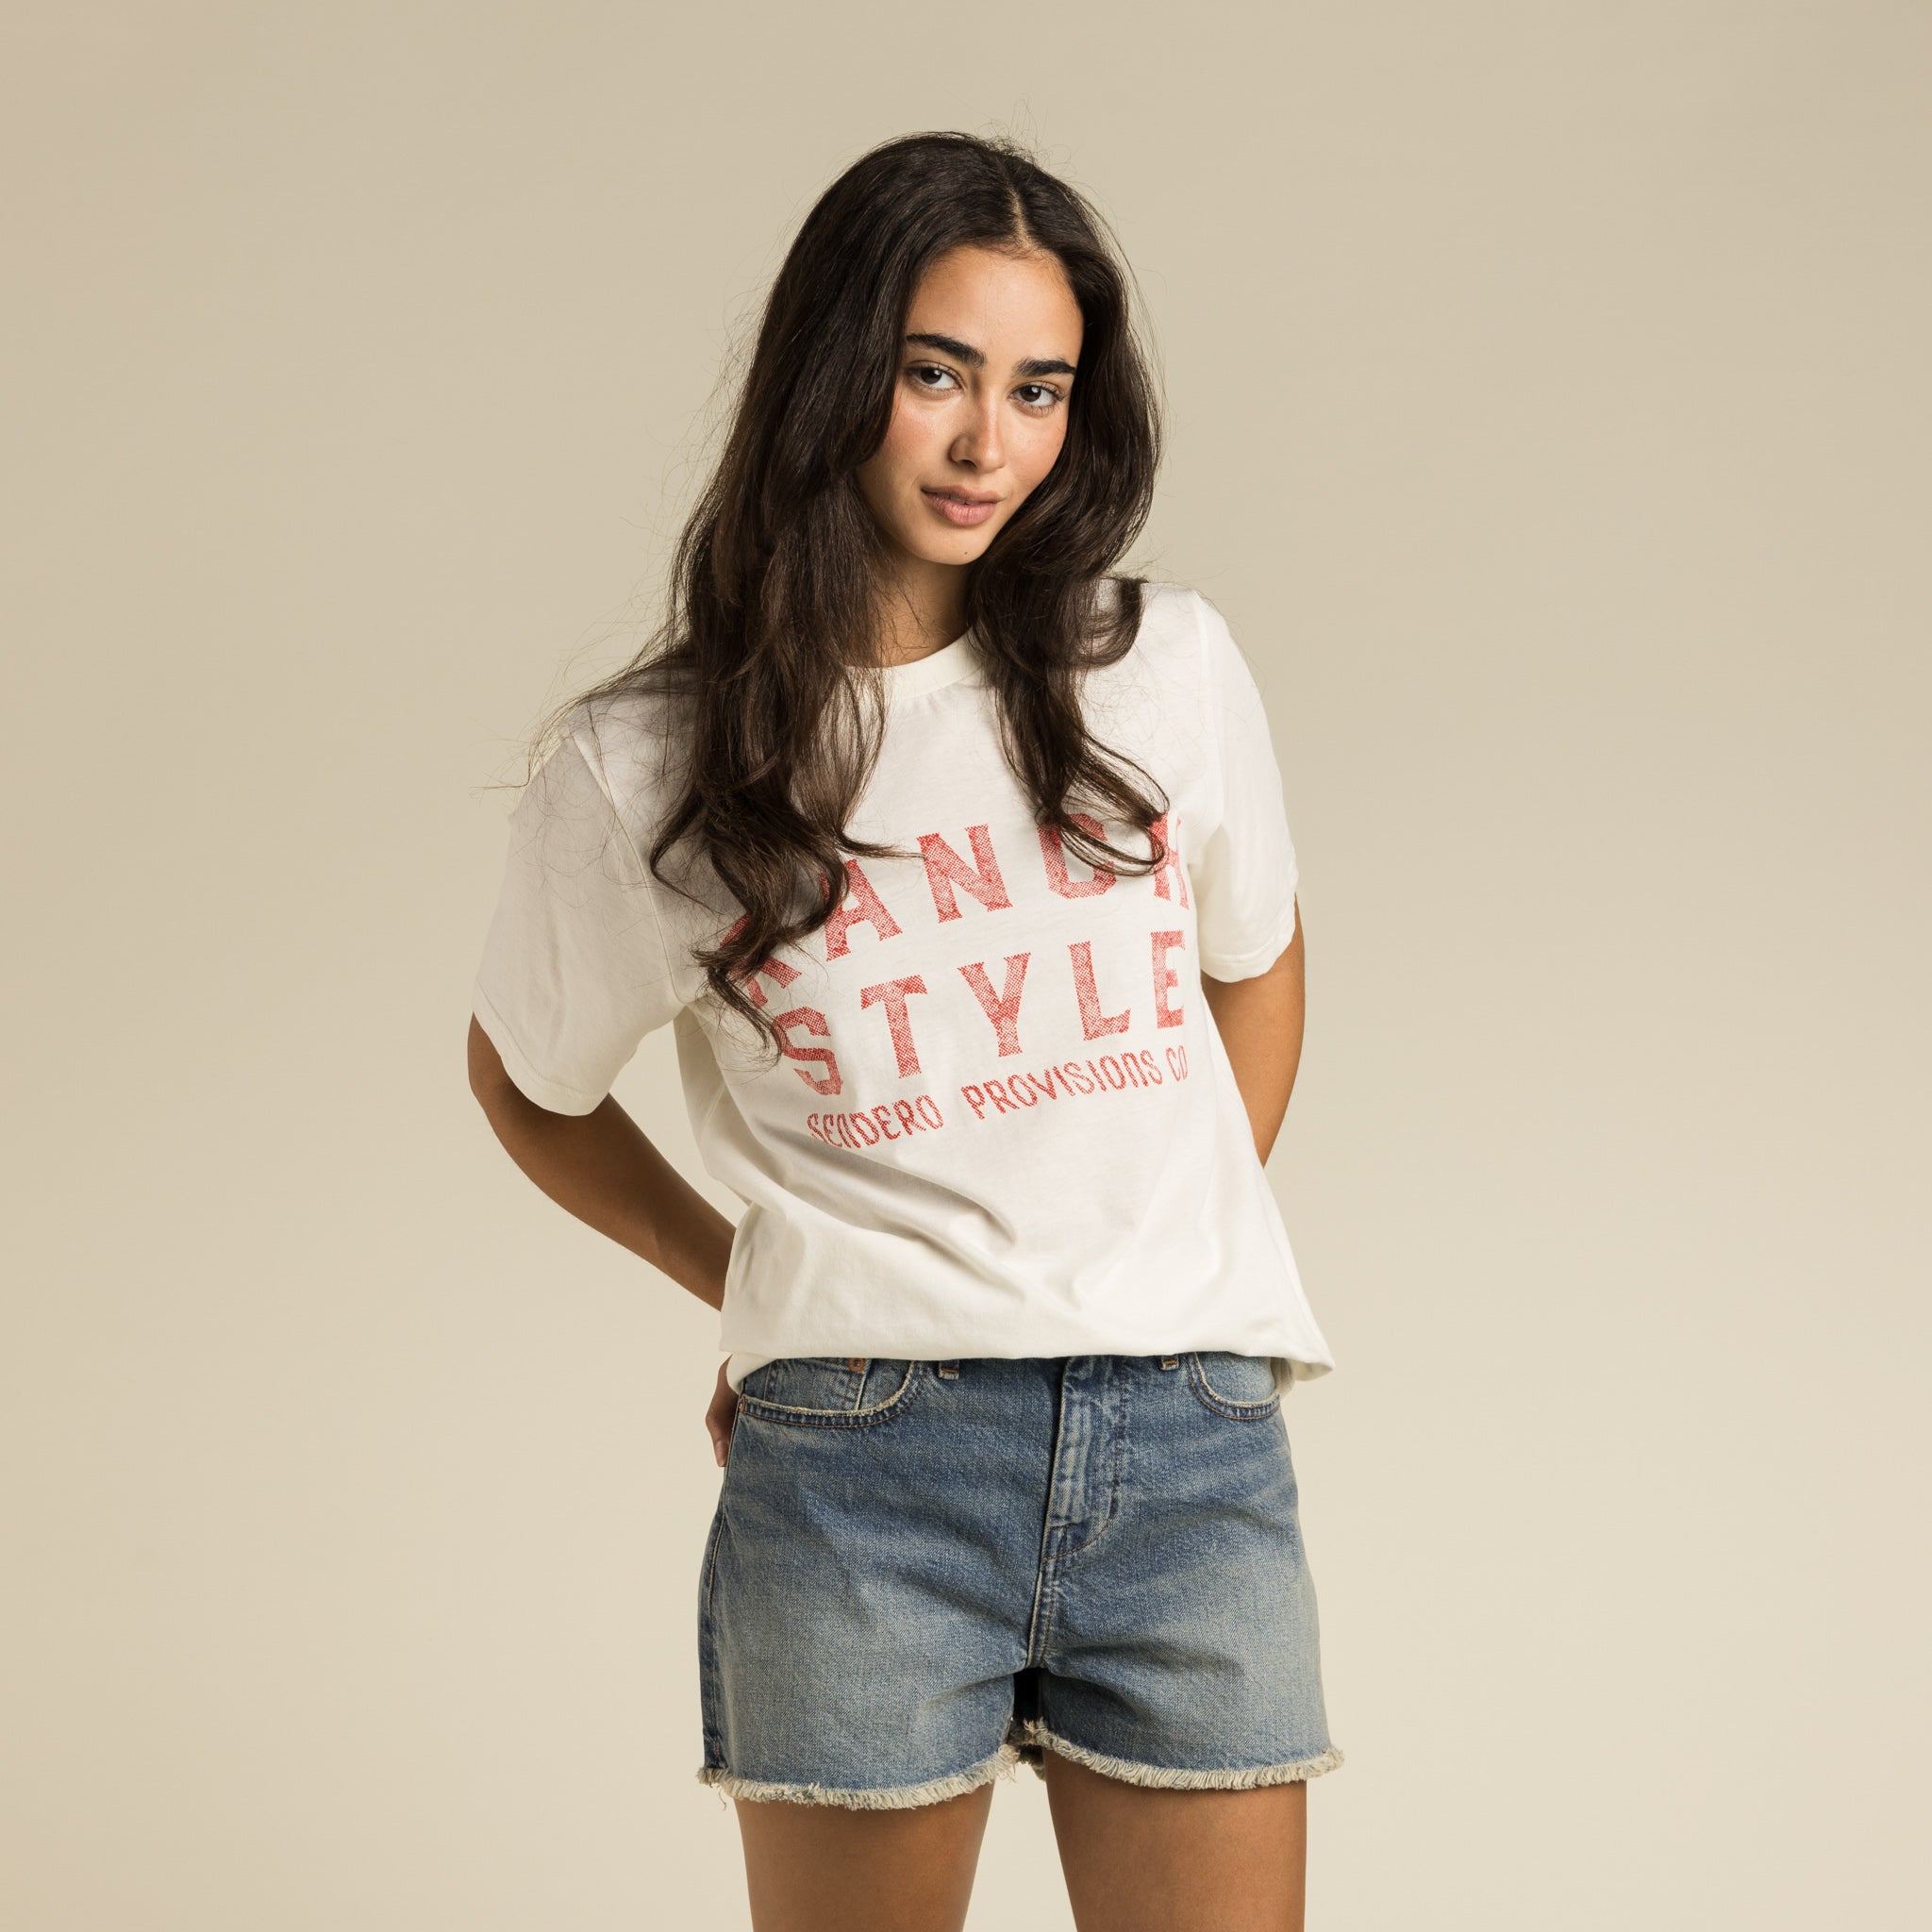 Ranch Style T-Shirt